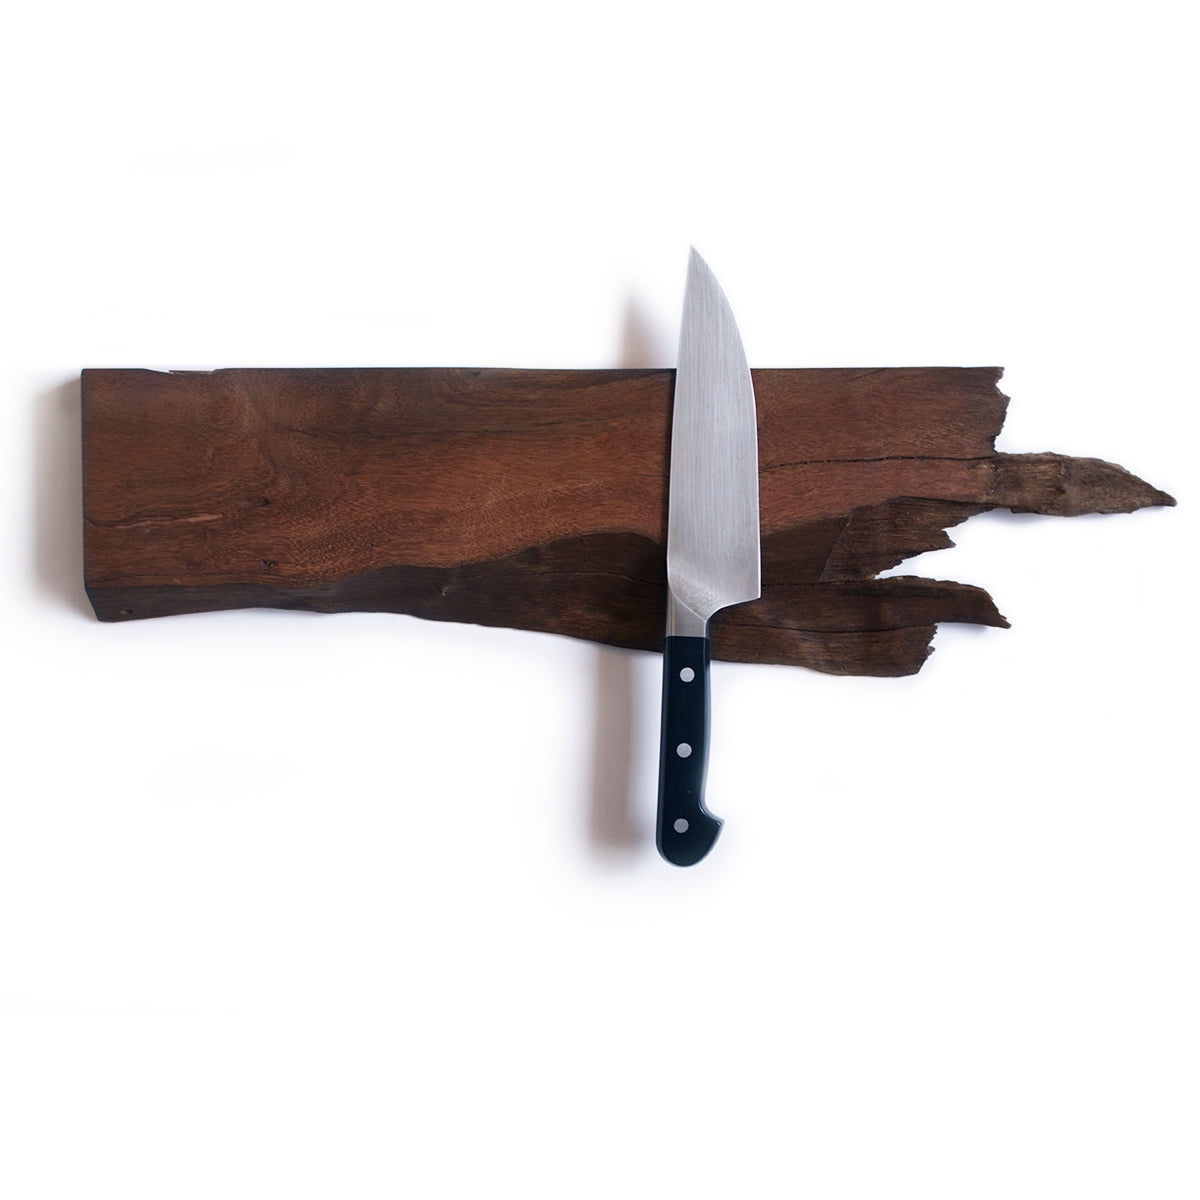 wooden magnetic knife black made with hardwood swamp mahogany wood with a live edge